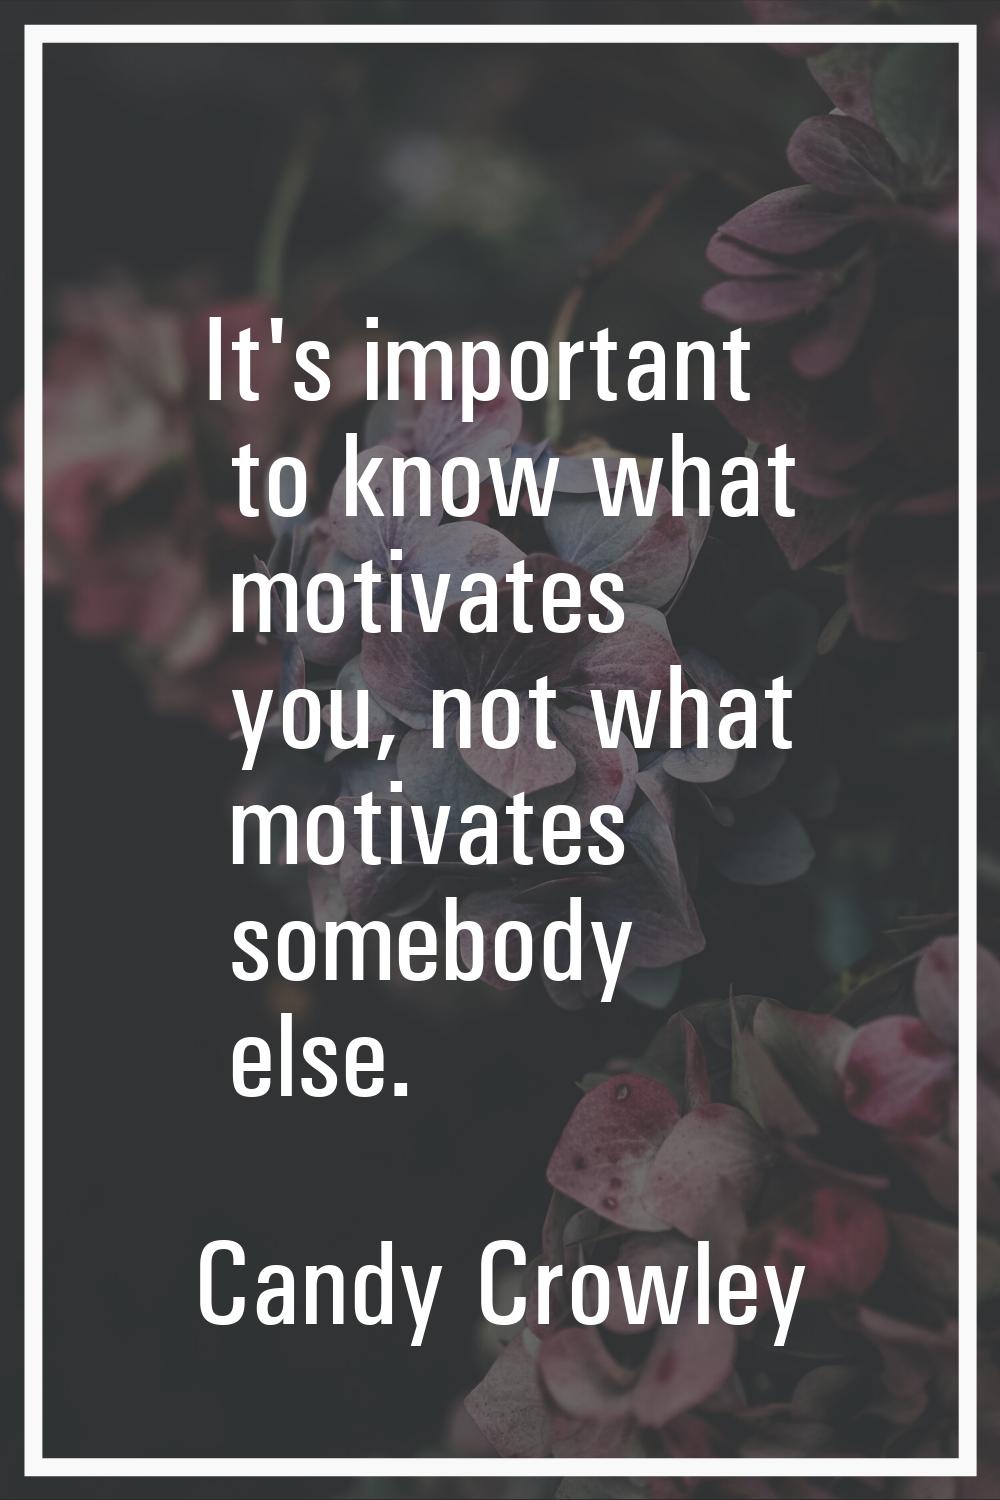 It's important to know what motivates you, not what motivates somebody else.